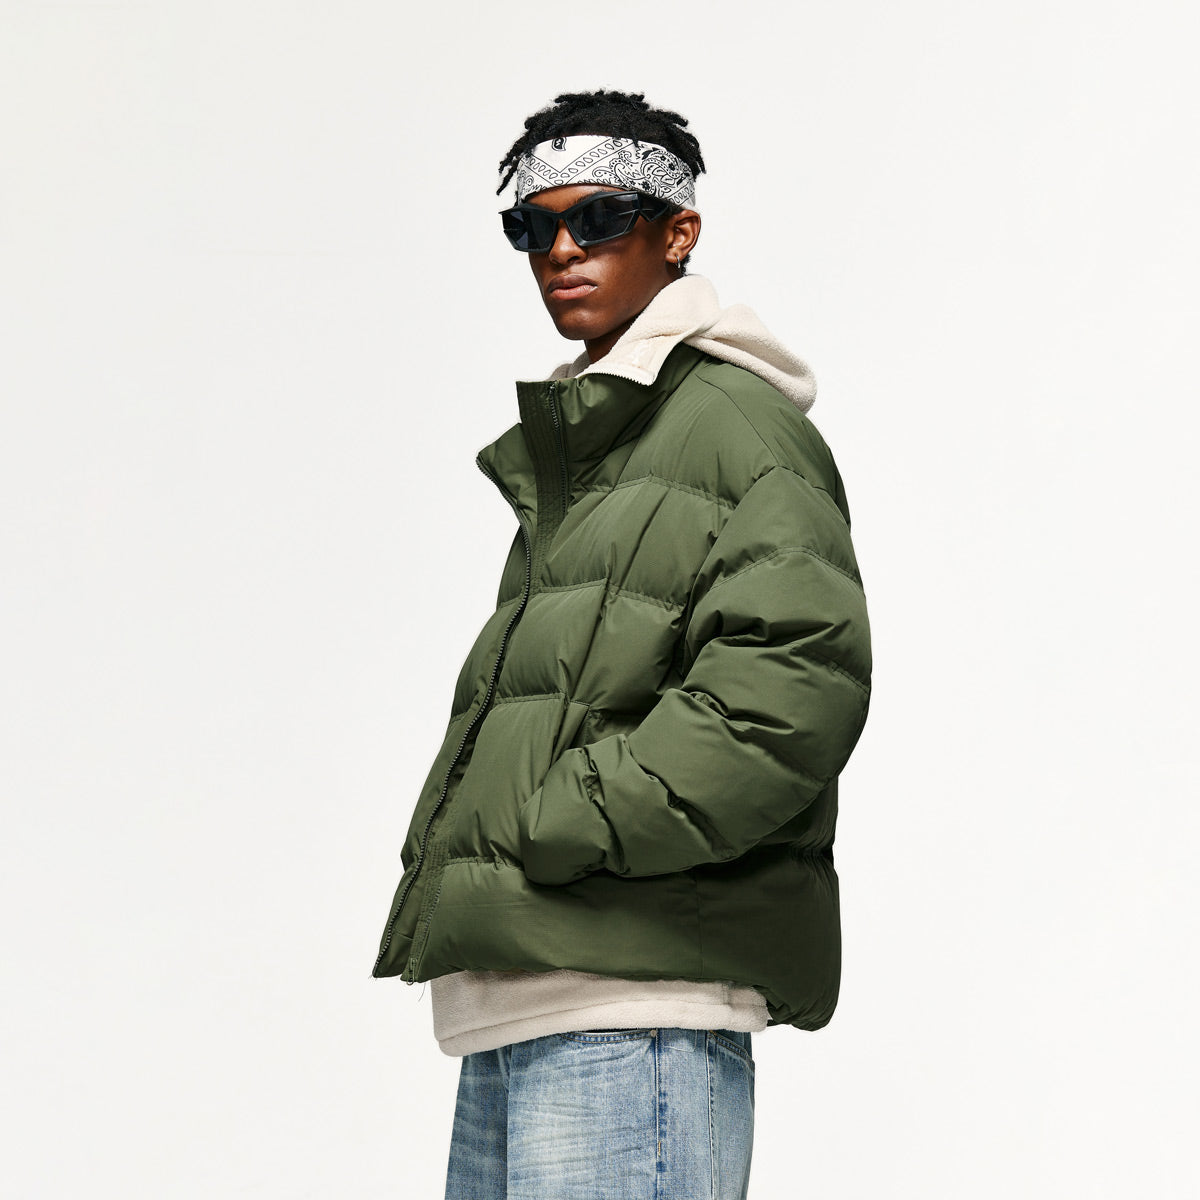 Stylish outerwear for men and women - the Army Green Puffer Jacket.